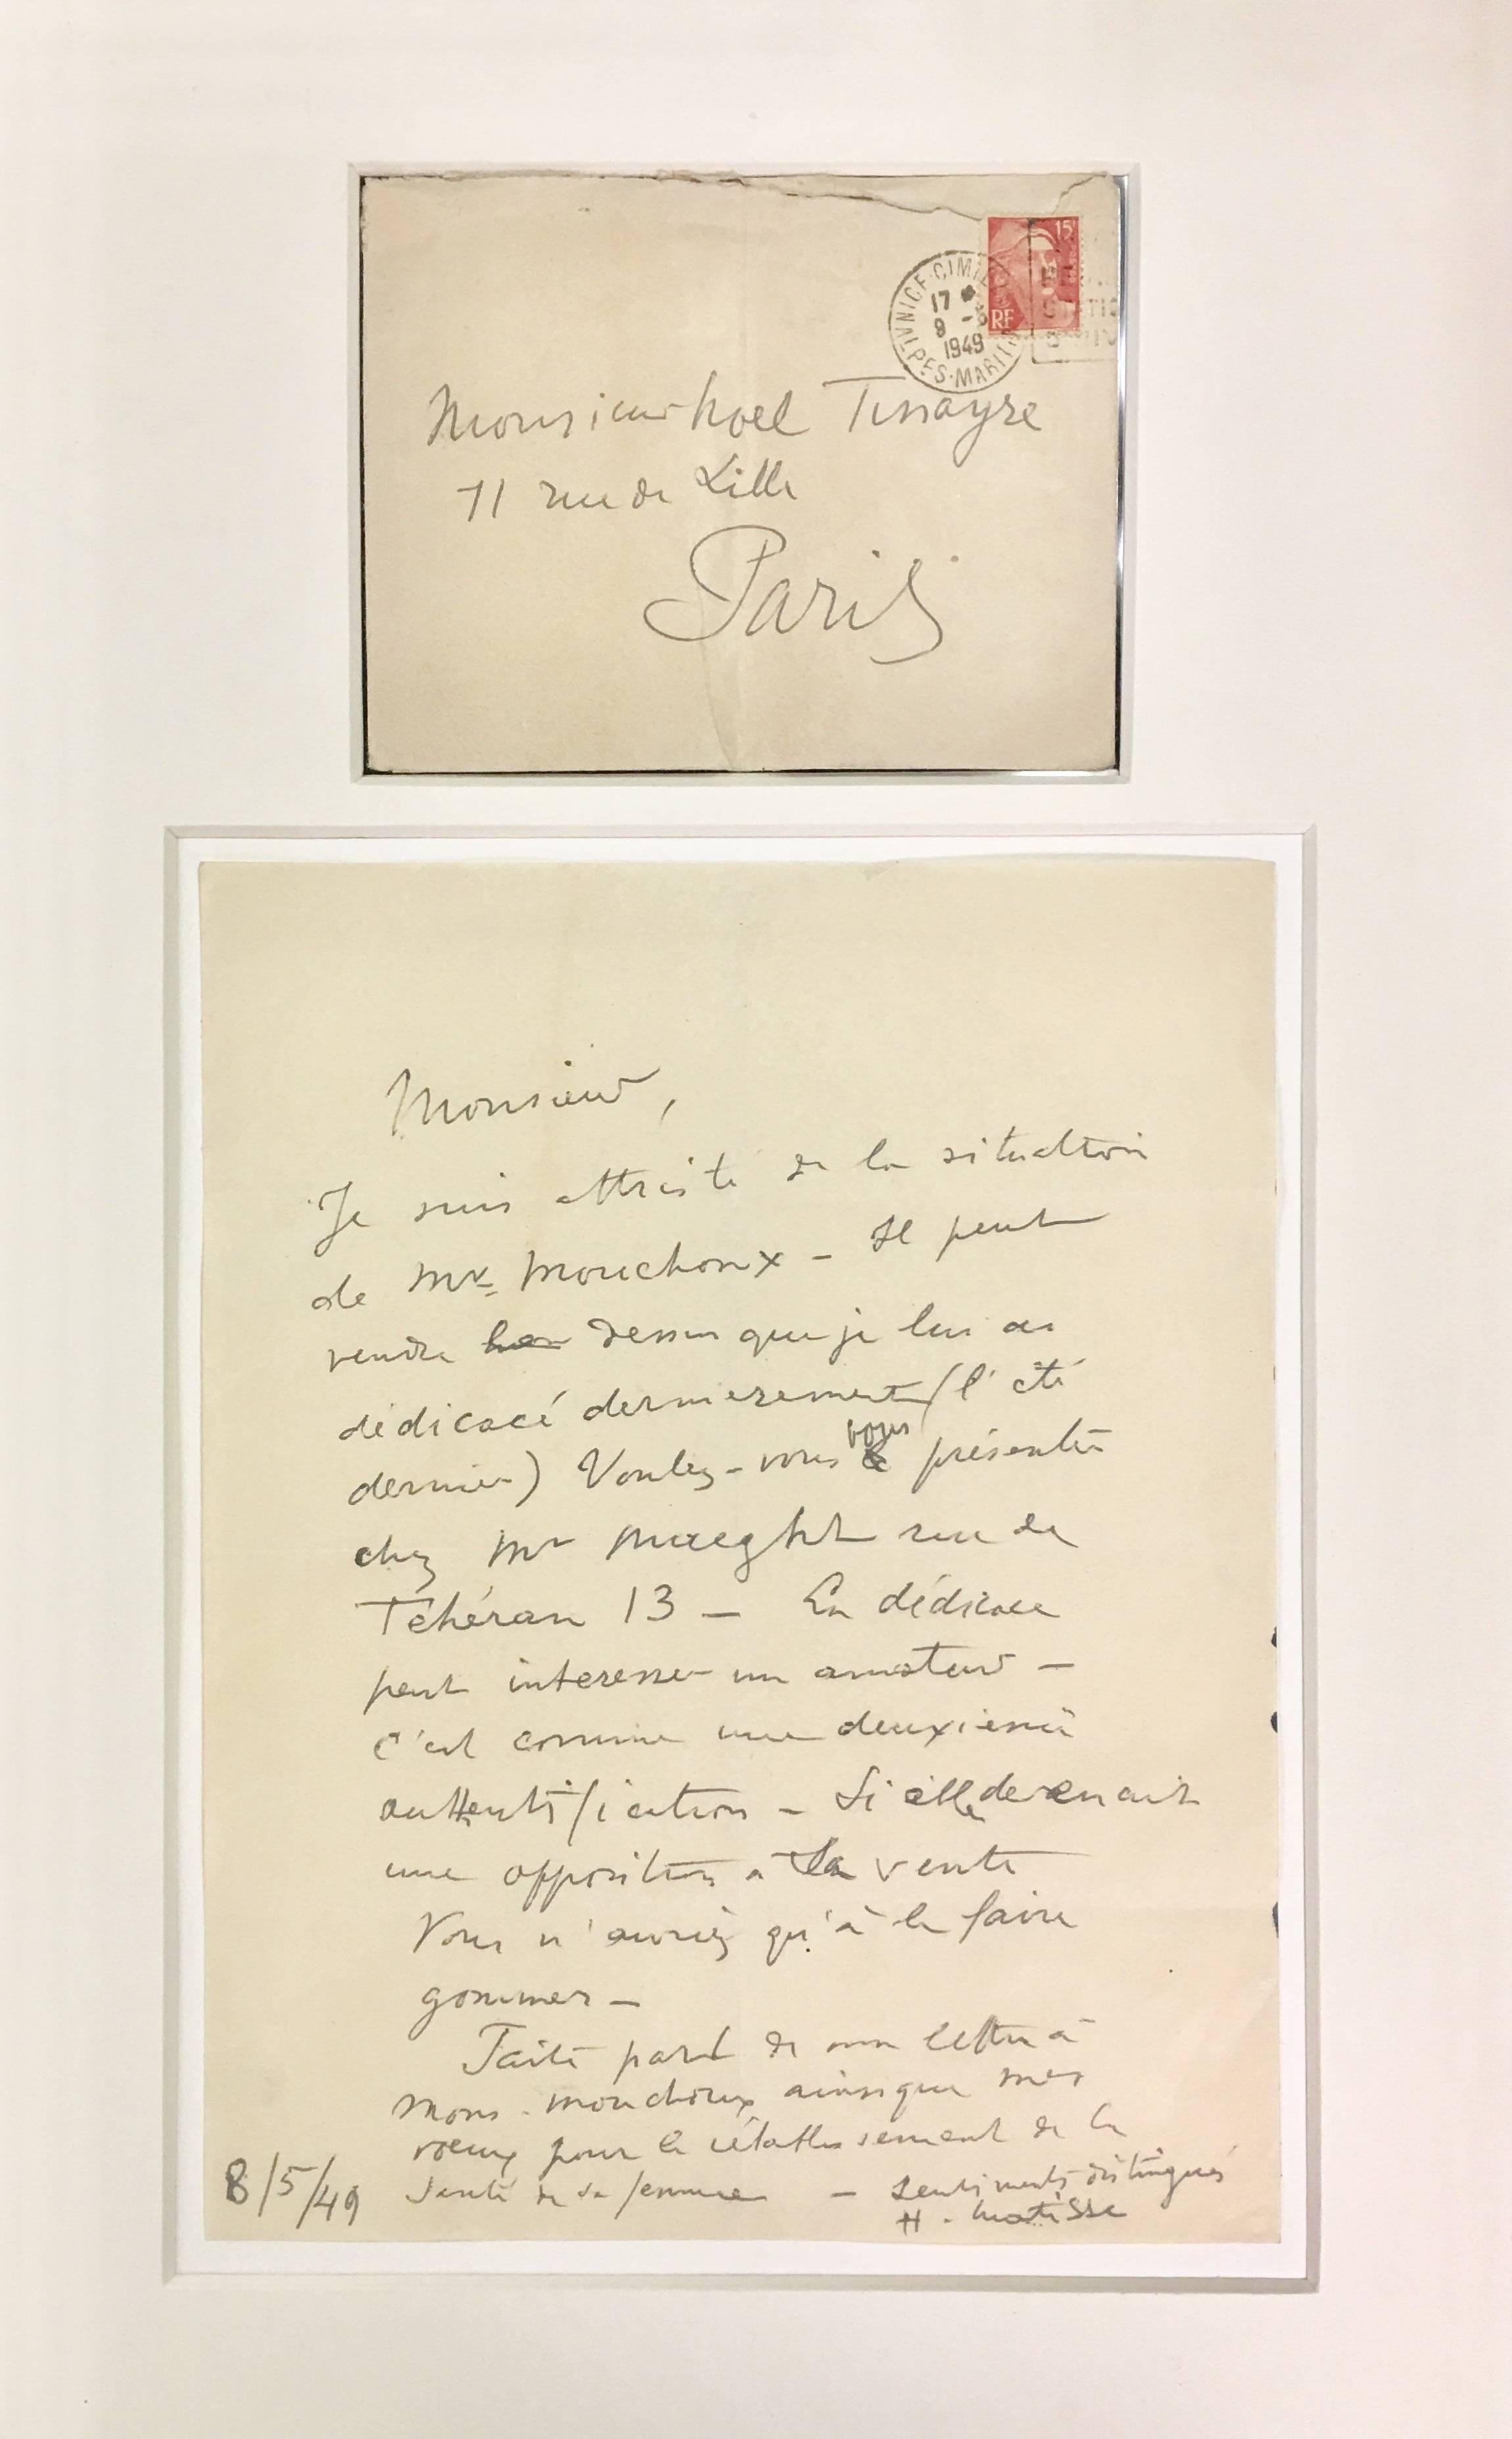 This piece is a unique, original pencil drawing on paper by Henri Matisse, created in 1916. It is hand signed, dated, and also bears a hand-written message from Matisse that reads 